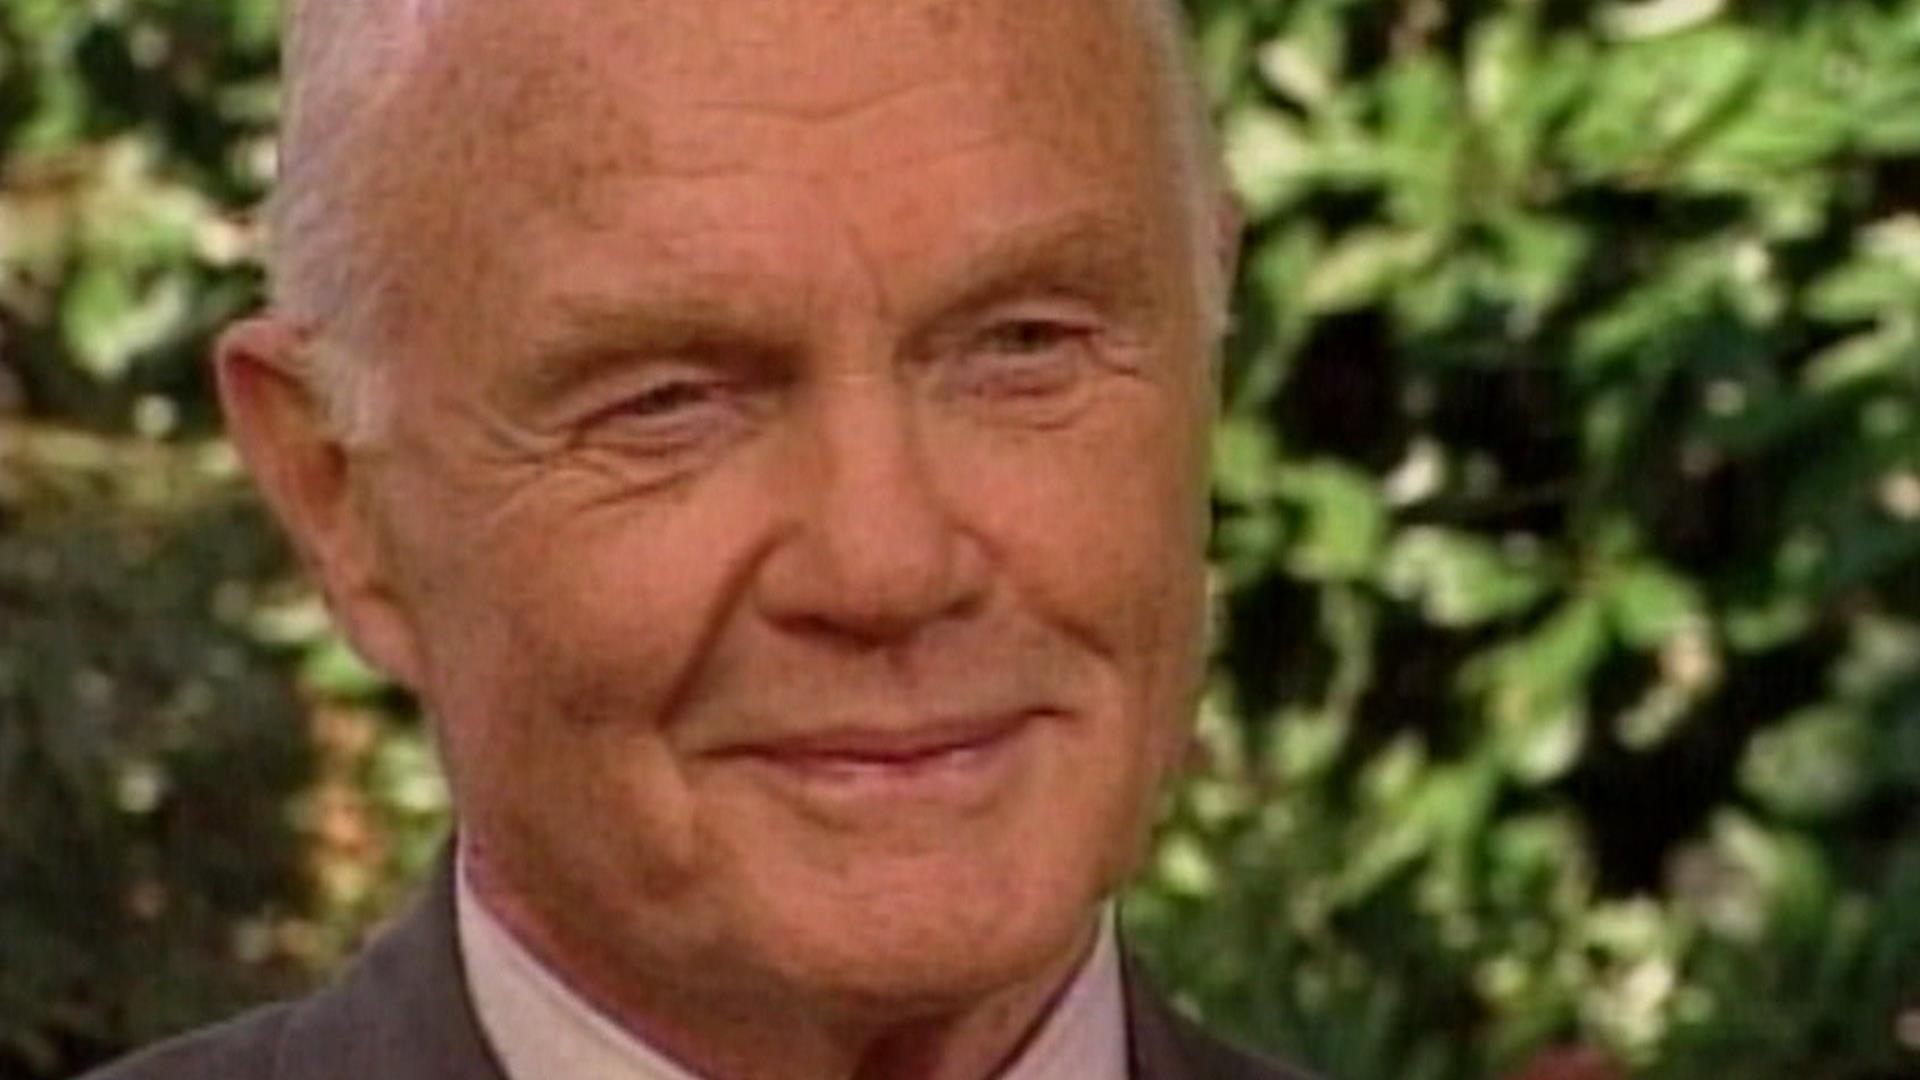 John Glenn in 1998 TODAY interview: 'I don't think I'm that different'